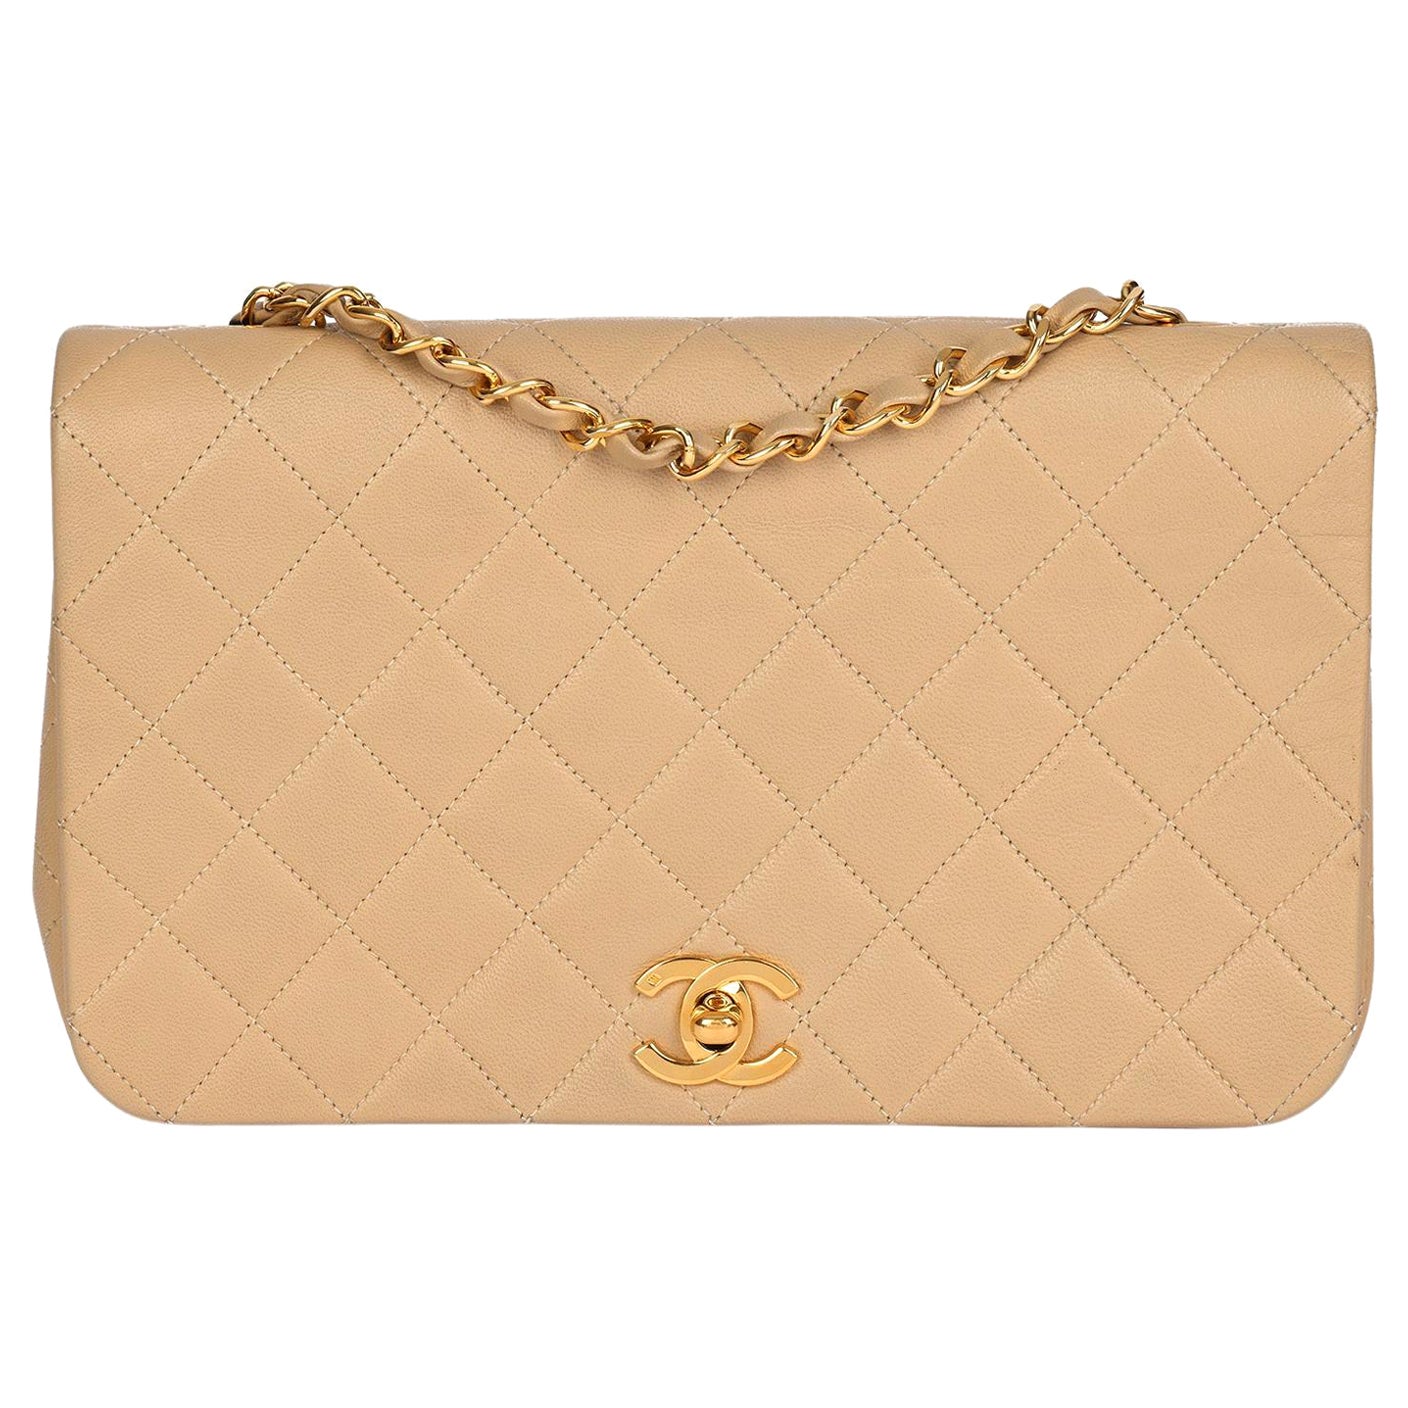 CHANEL Beige Quilted Lambskin Vintage Small Classic Single Full Flap Bag 